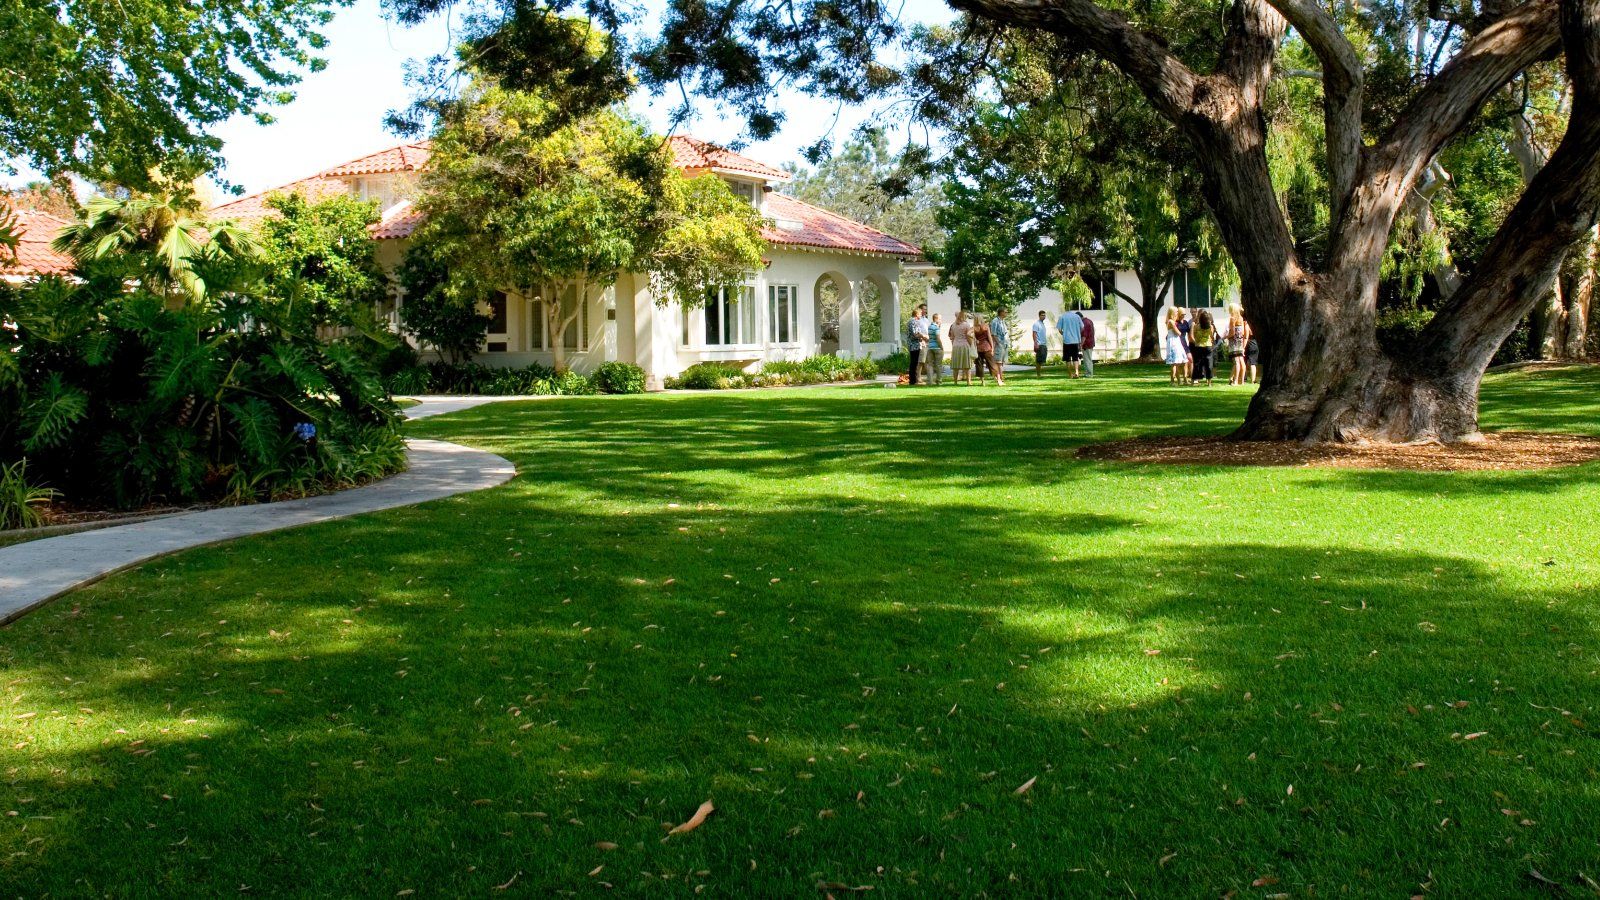 People gather outside on the lawn of the Alumni House